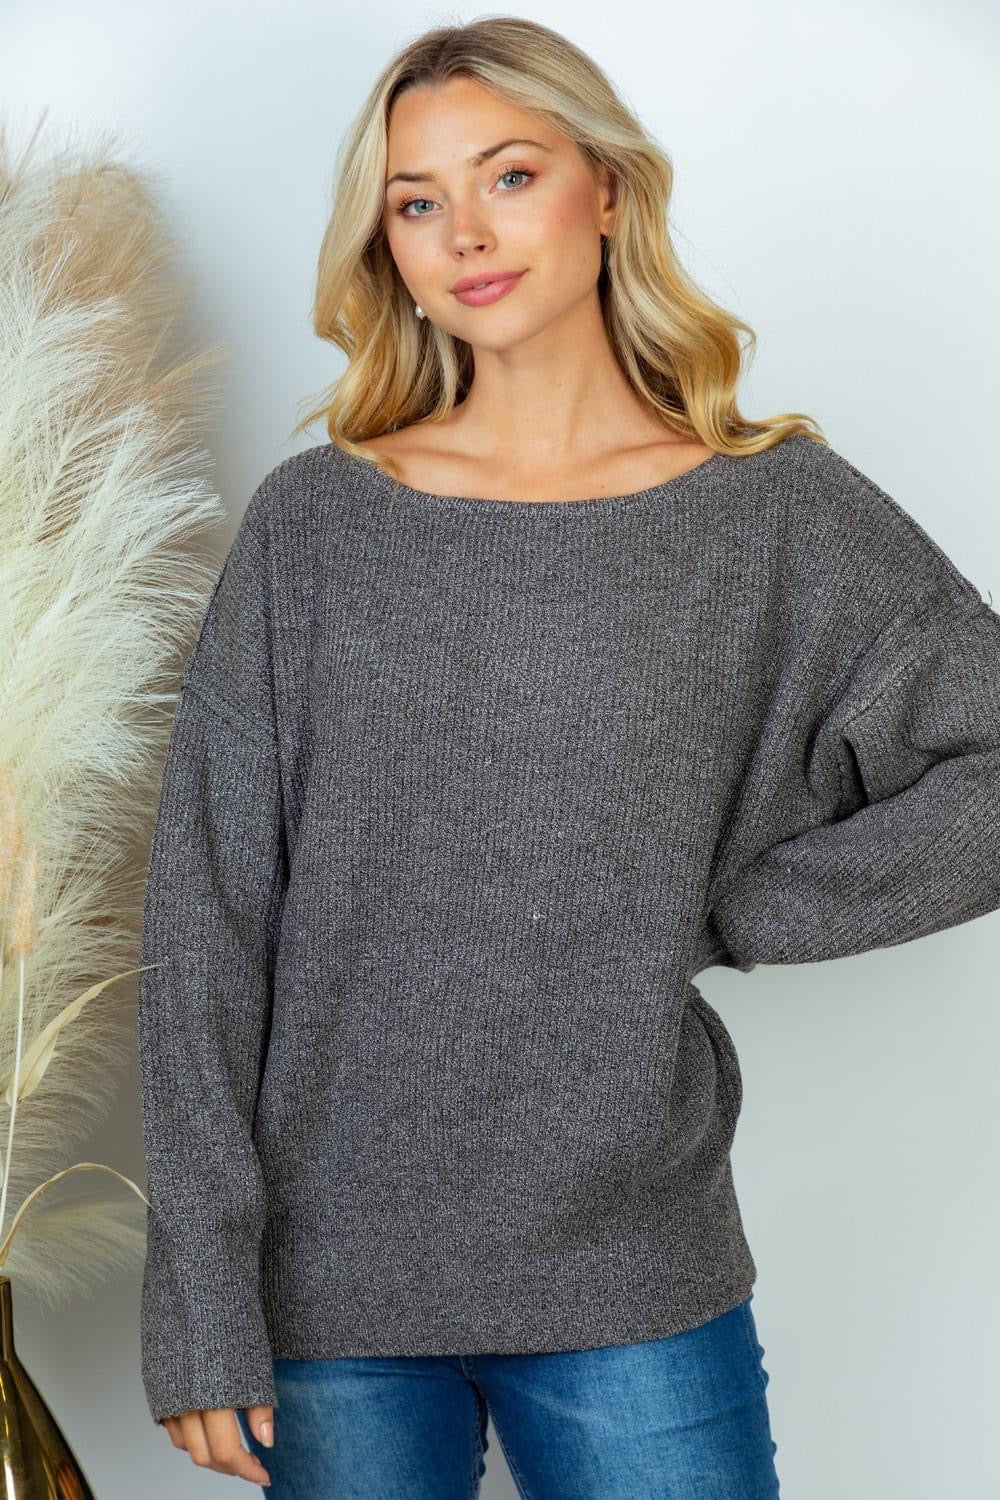 White Birch Boatneck Sweater in Charcoal